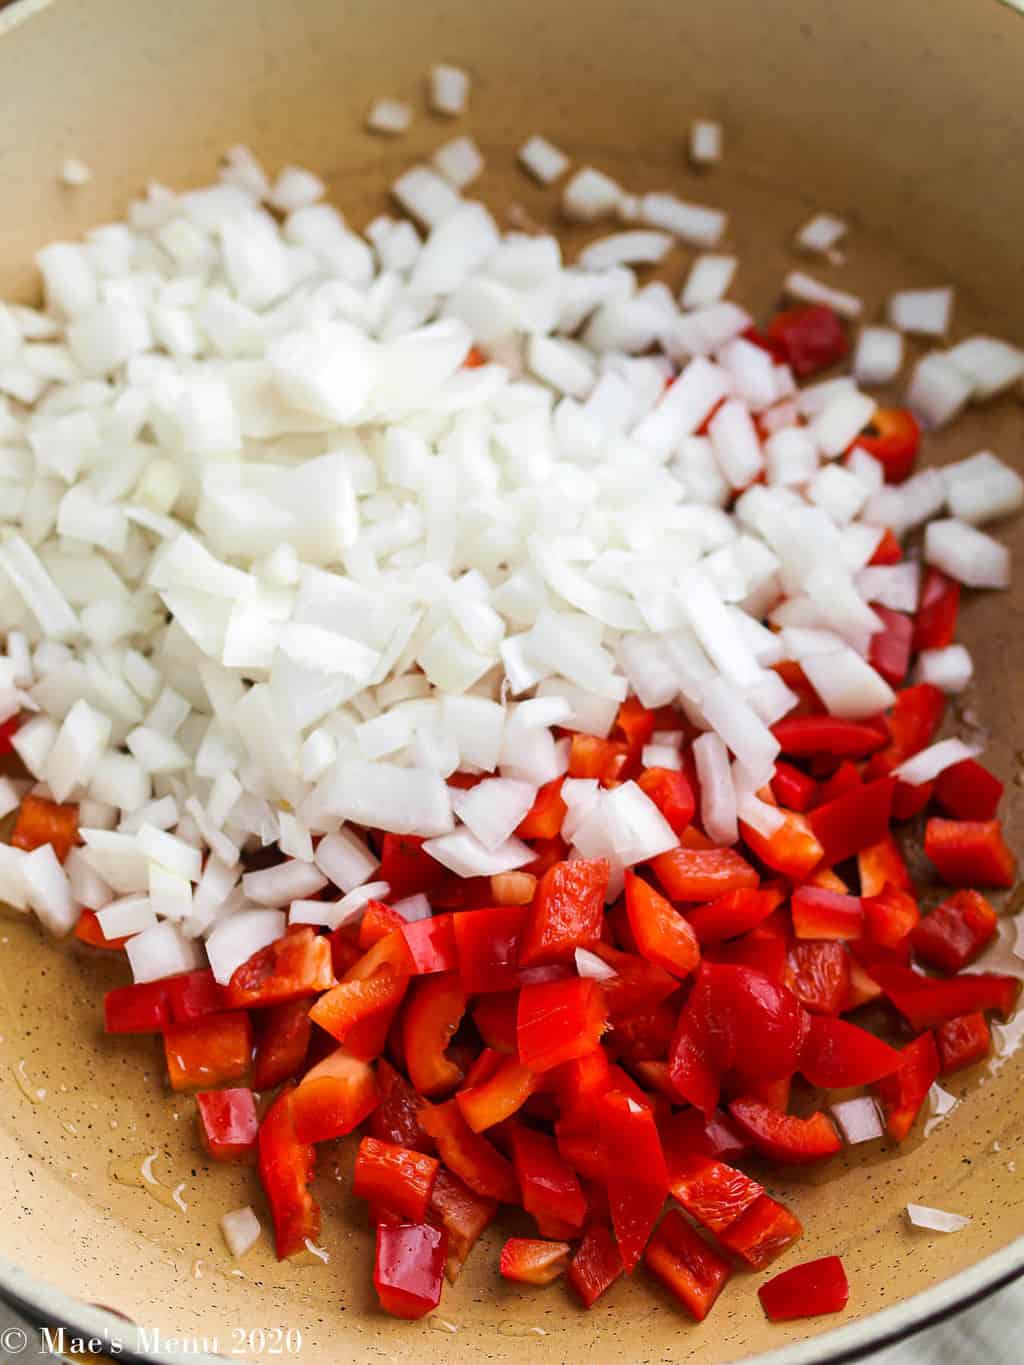 Onions and peppers in a saute pan